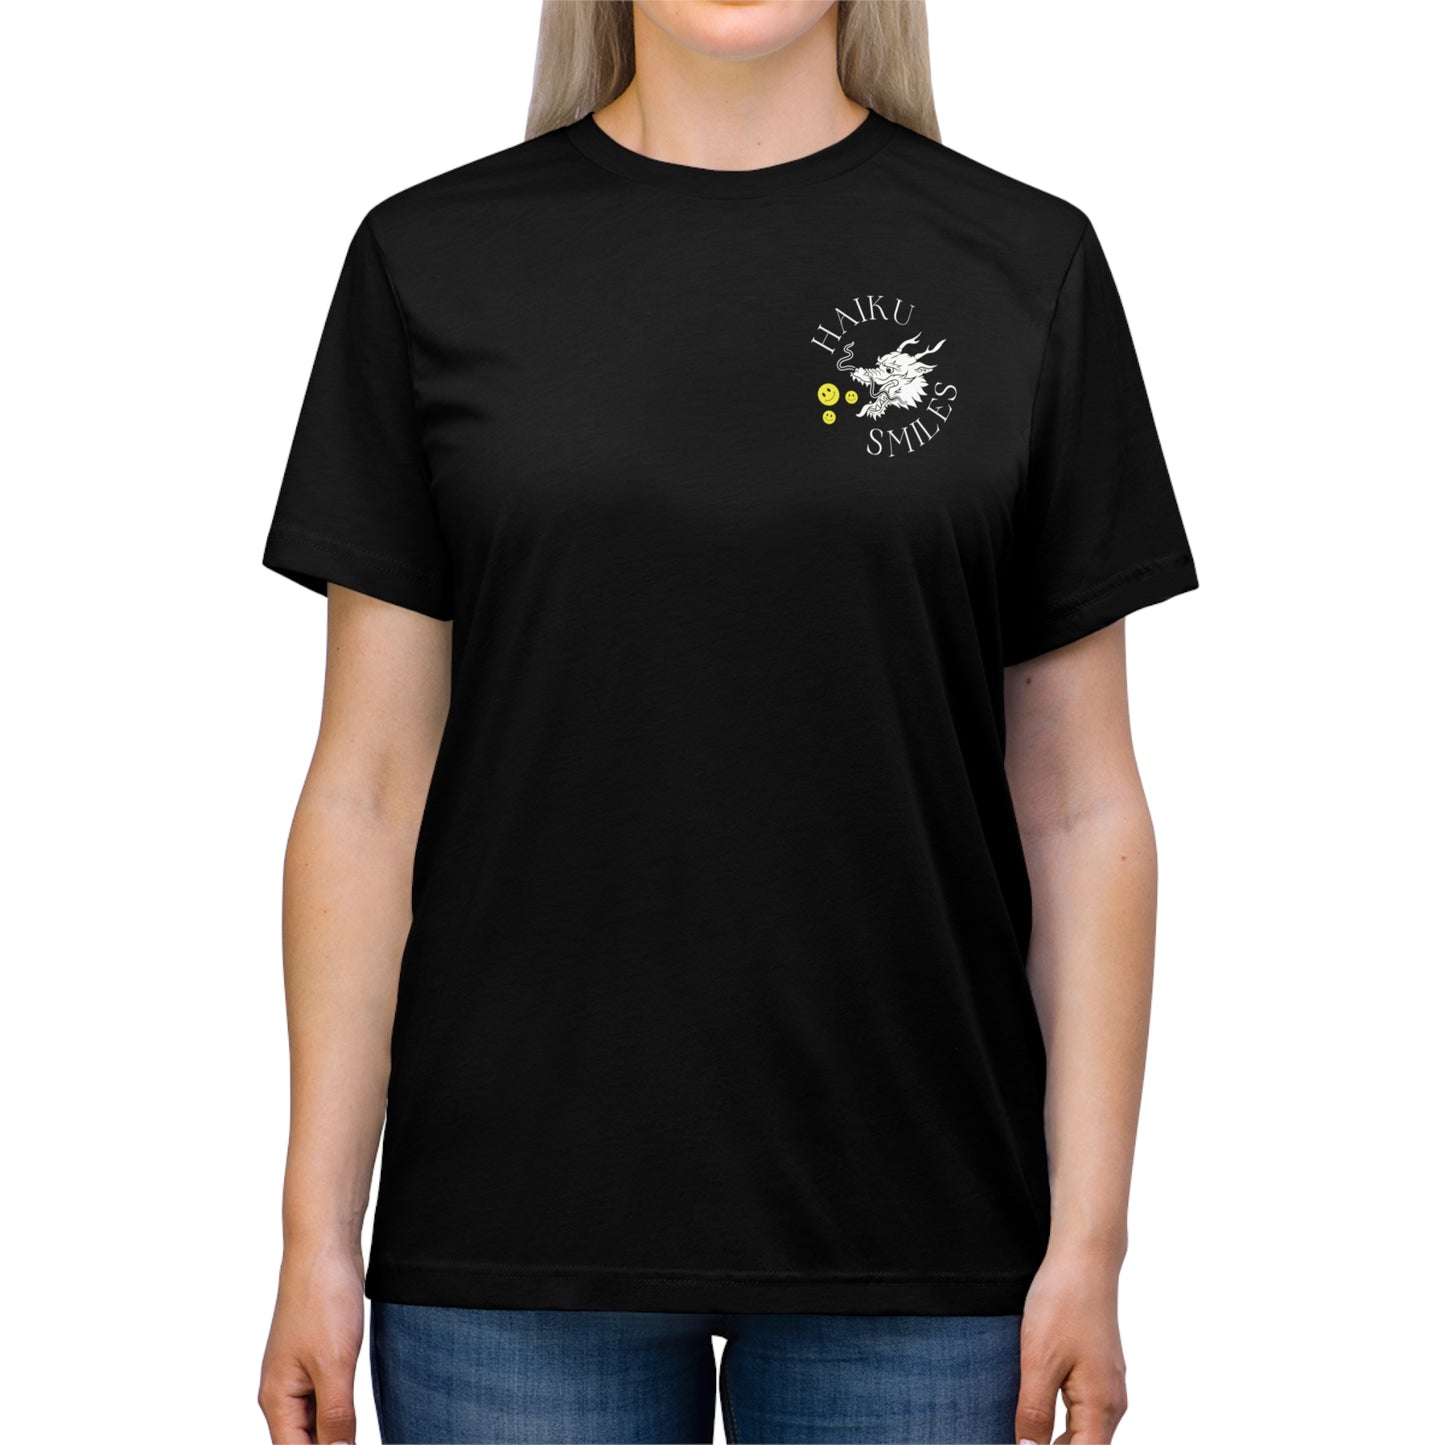 The Strong Breathe Smiles! - Triblend Tee